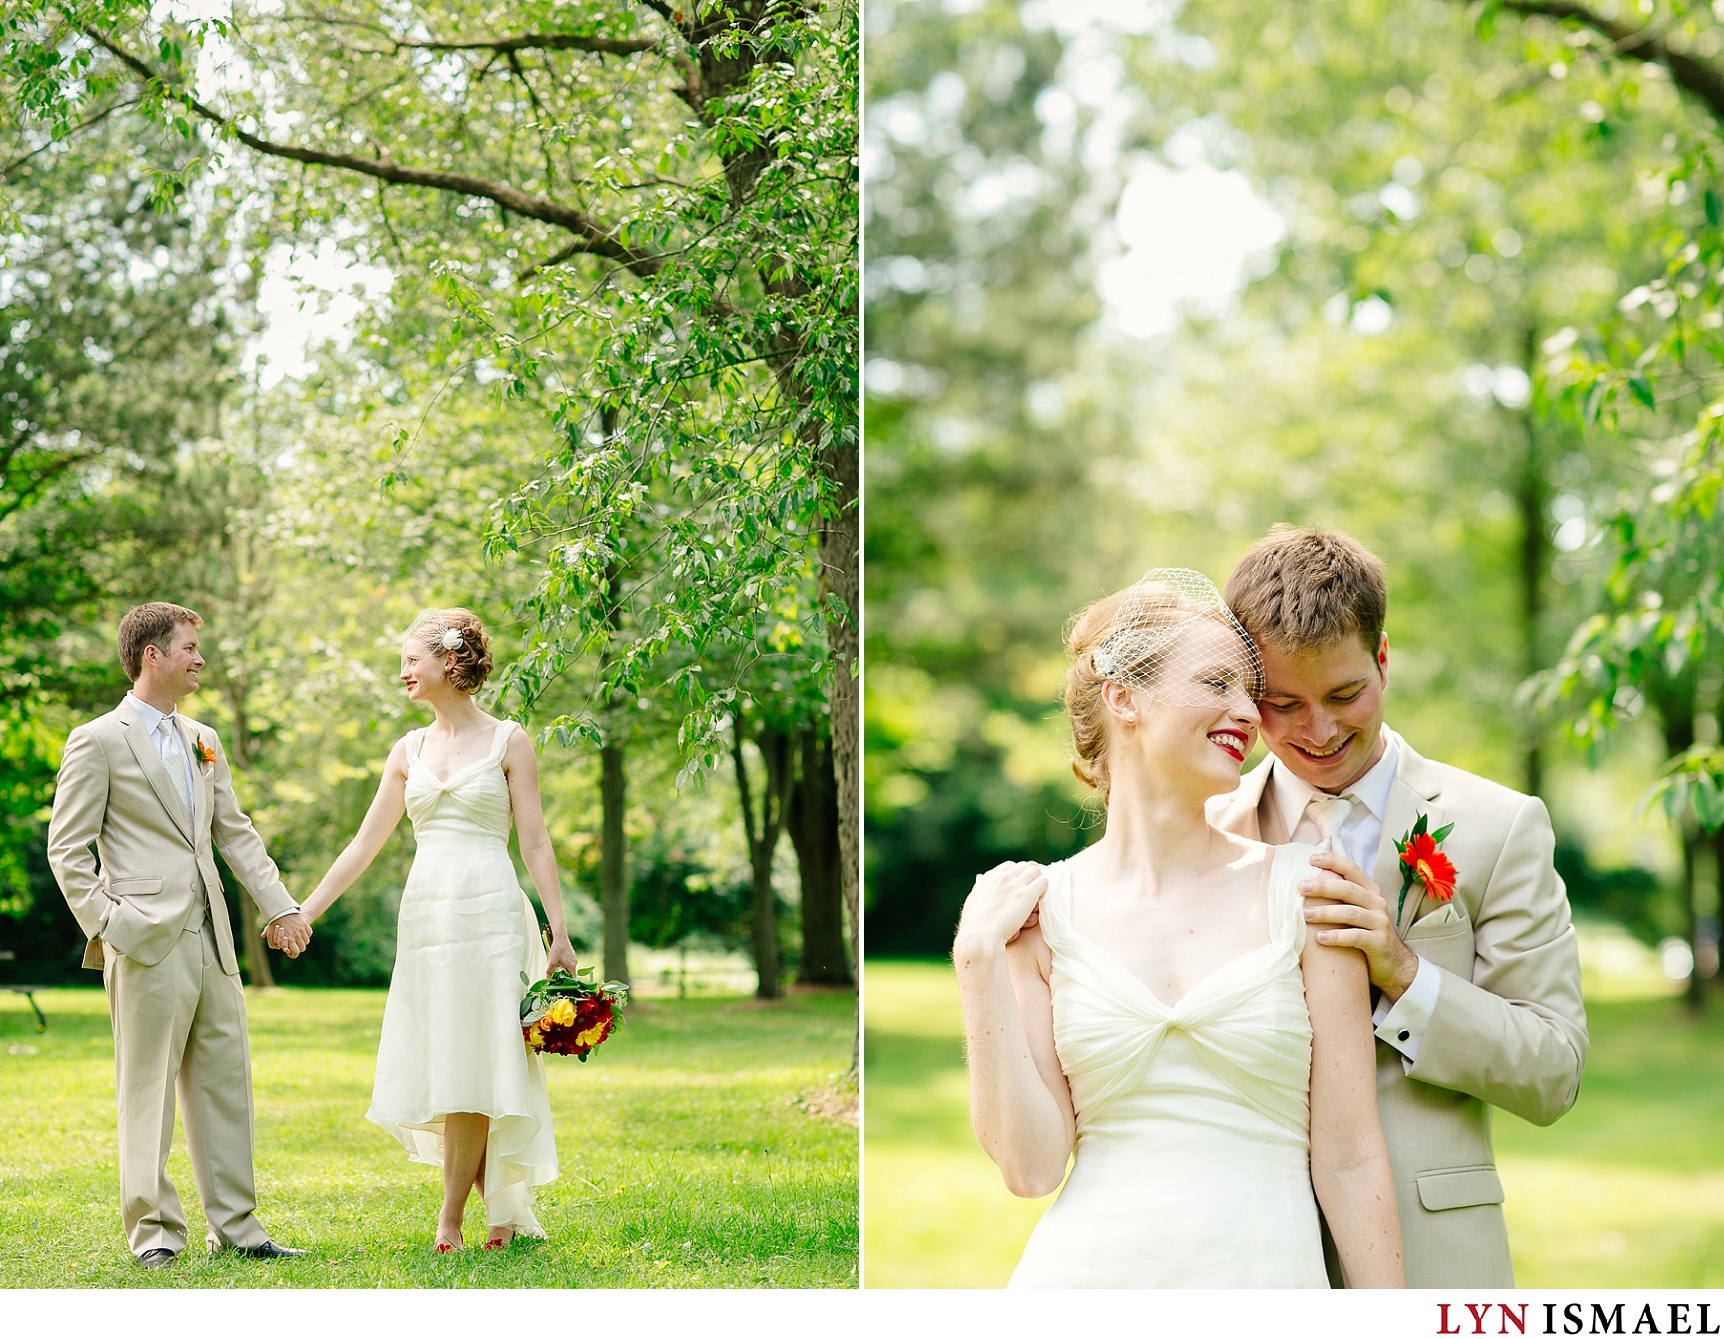 Portraits of the bride and groom in Belwood Lake Conservation Area where they held their wedding.